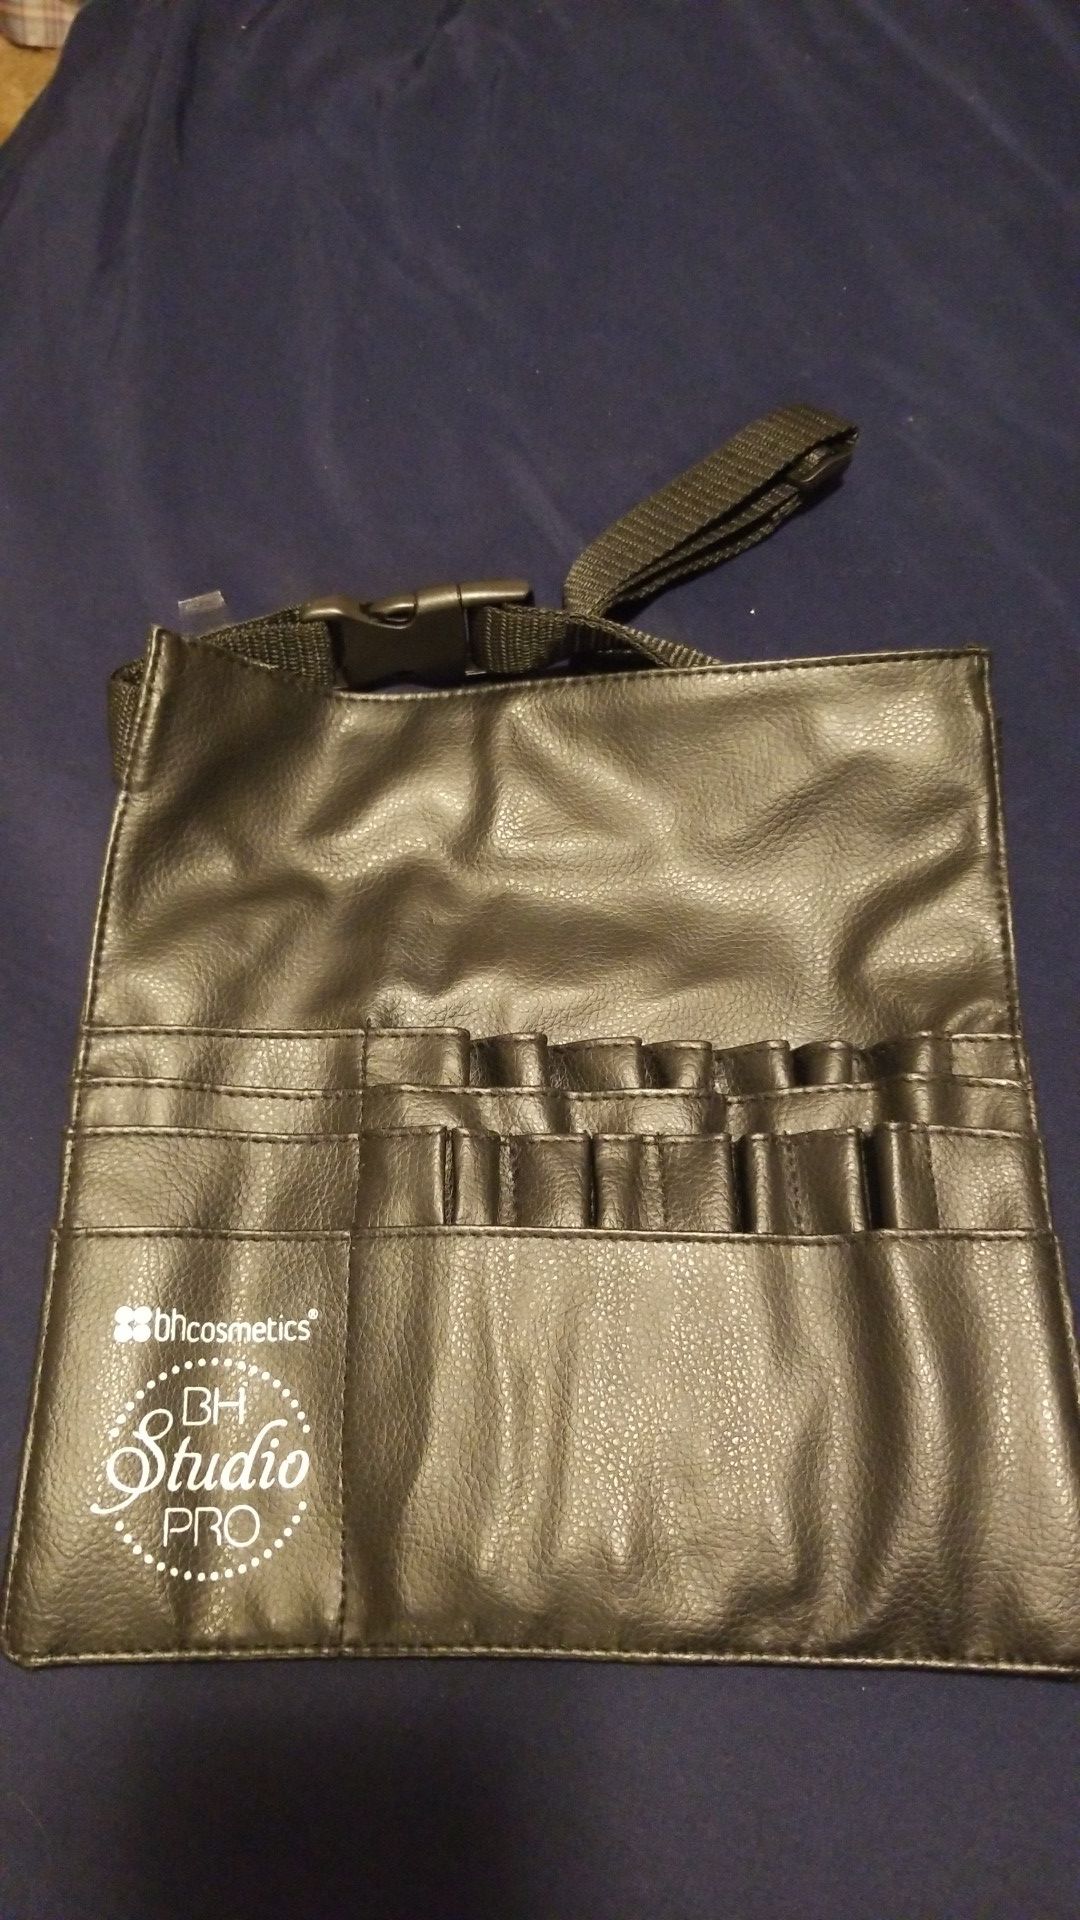 Makeup brush pouch